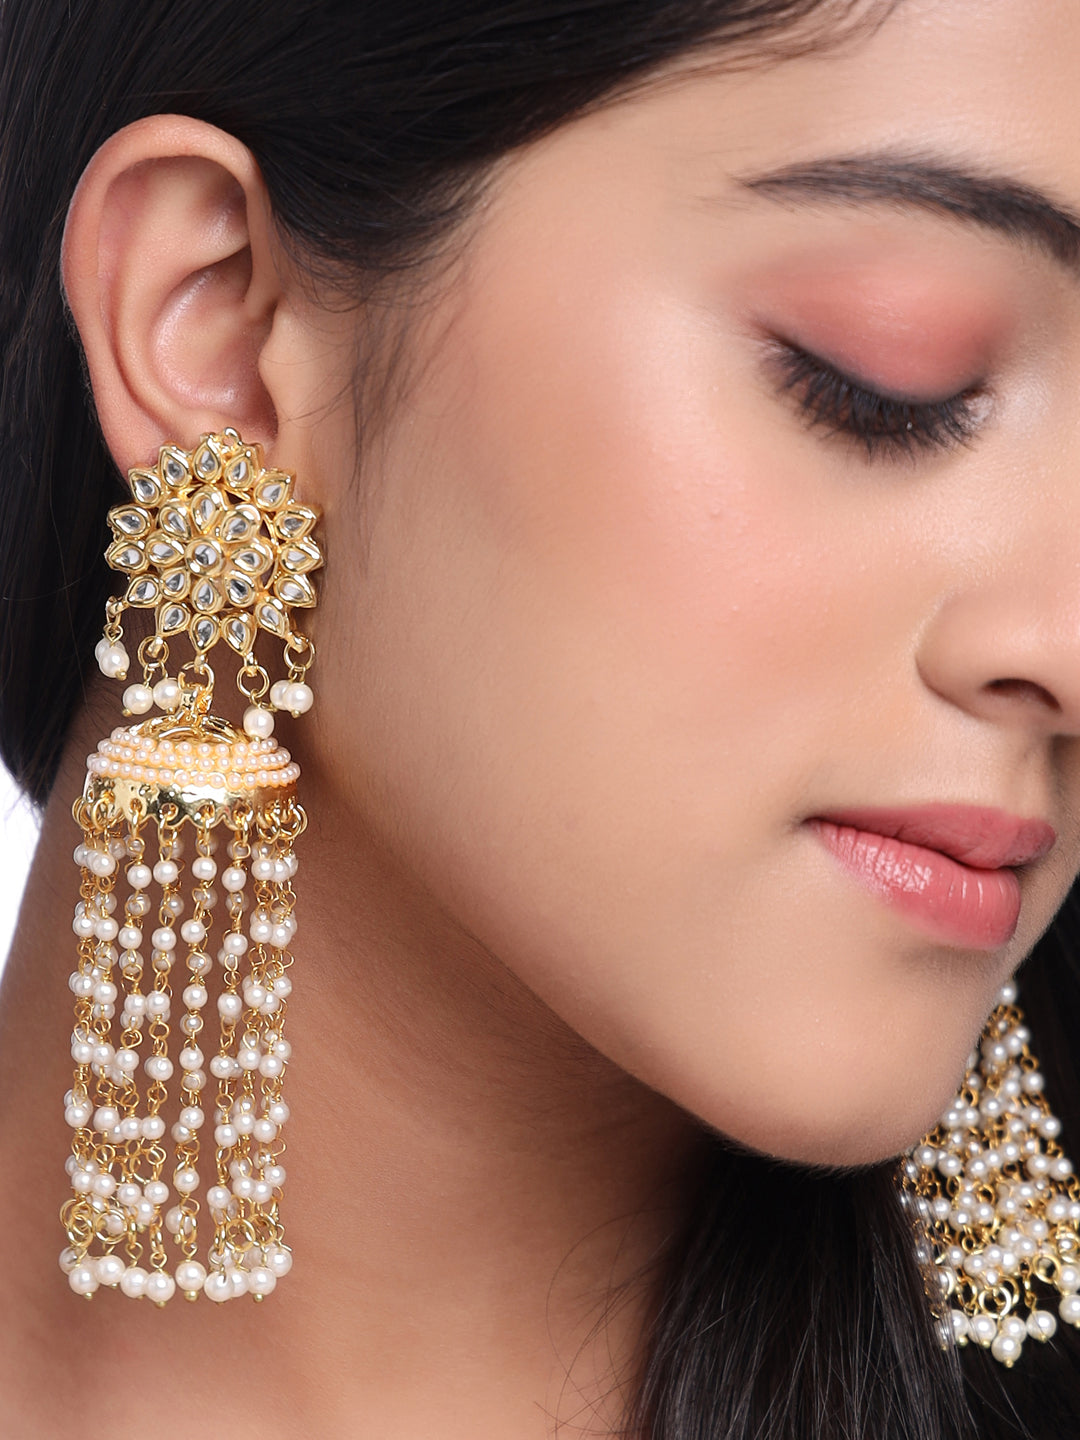 Women's Gold-Plated Contemporary Jhumkas Earrings - NVR